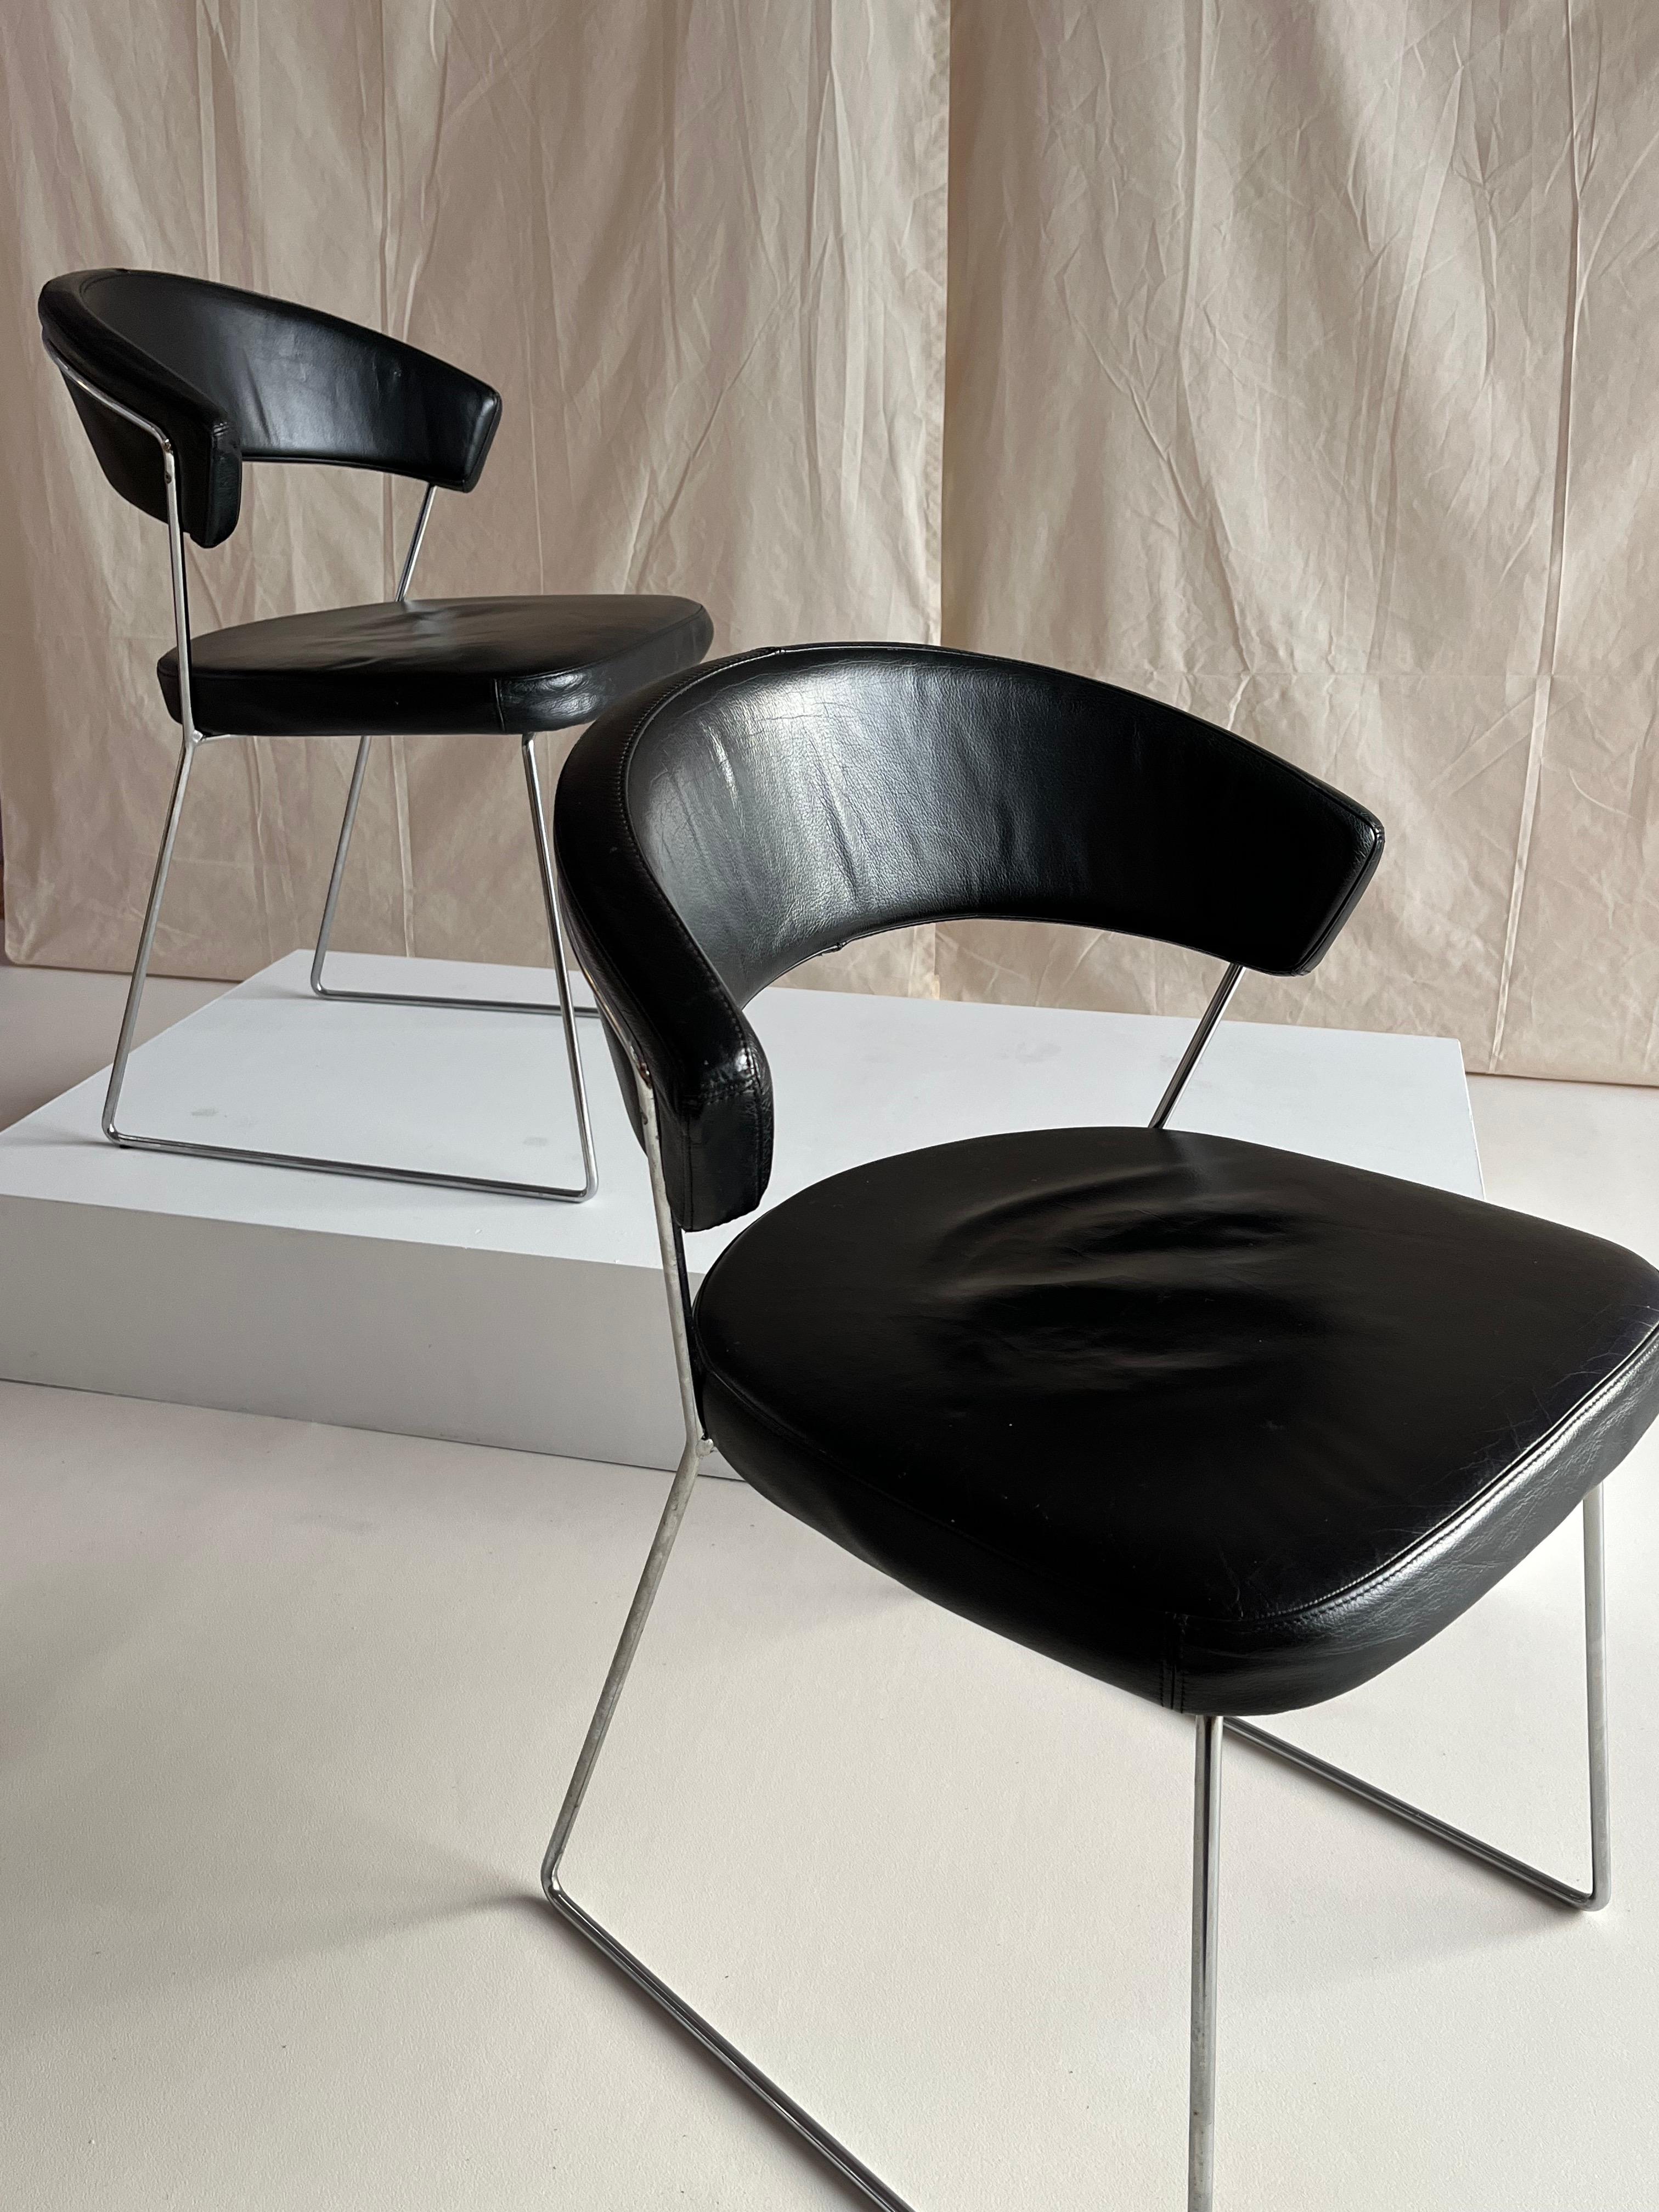 Italian Leather chrome New York chairs by Lupo Design for Calligaris